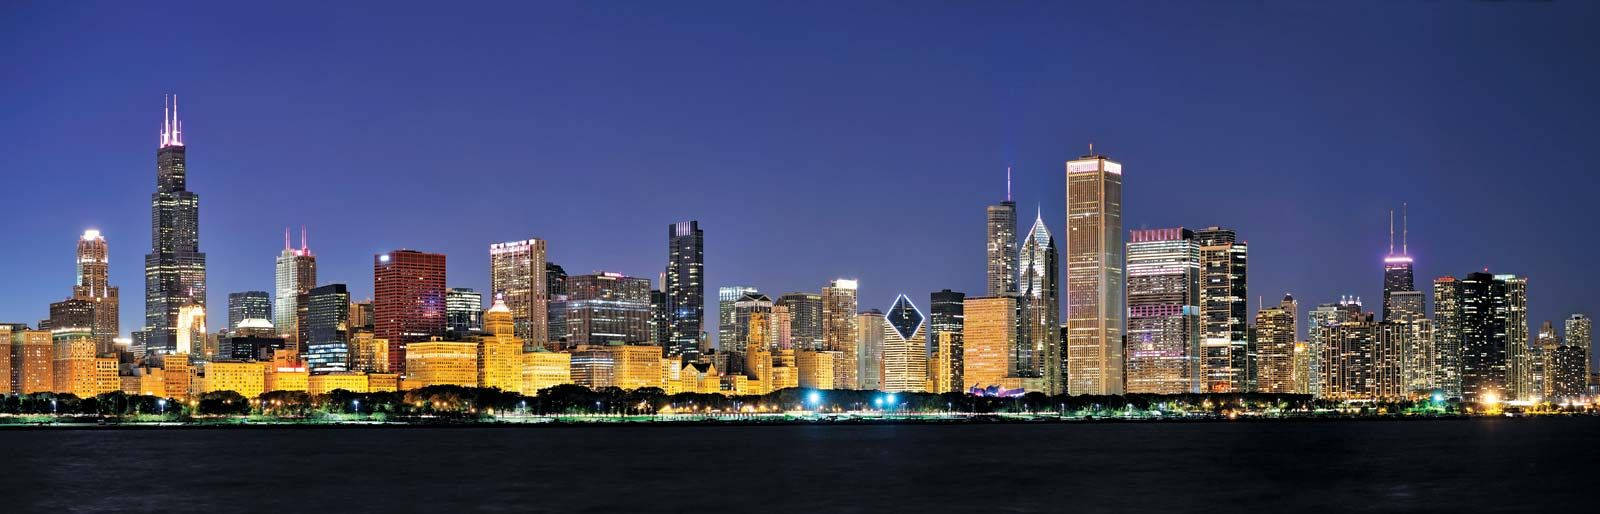 Chicago Illinois Lakefront Buildings At Night Wallpaper